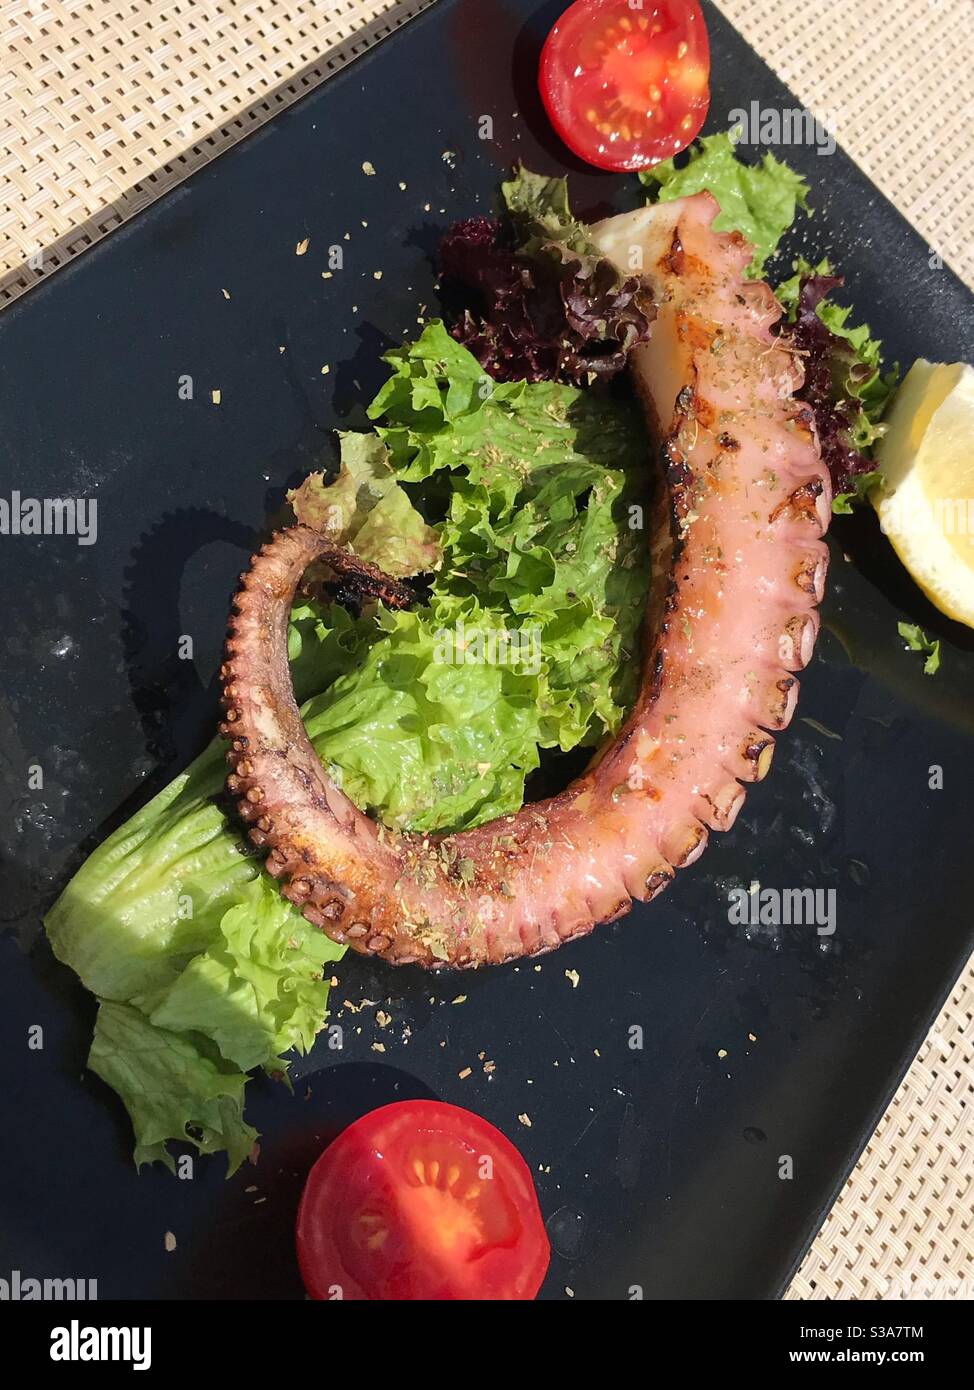 Black plate with grilled octopus and tomatoes Stock Photo